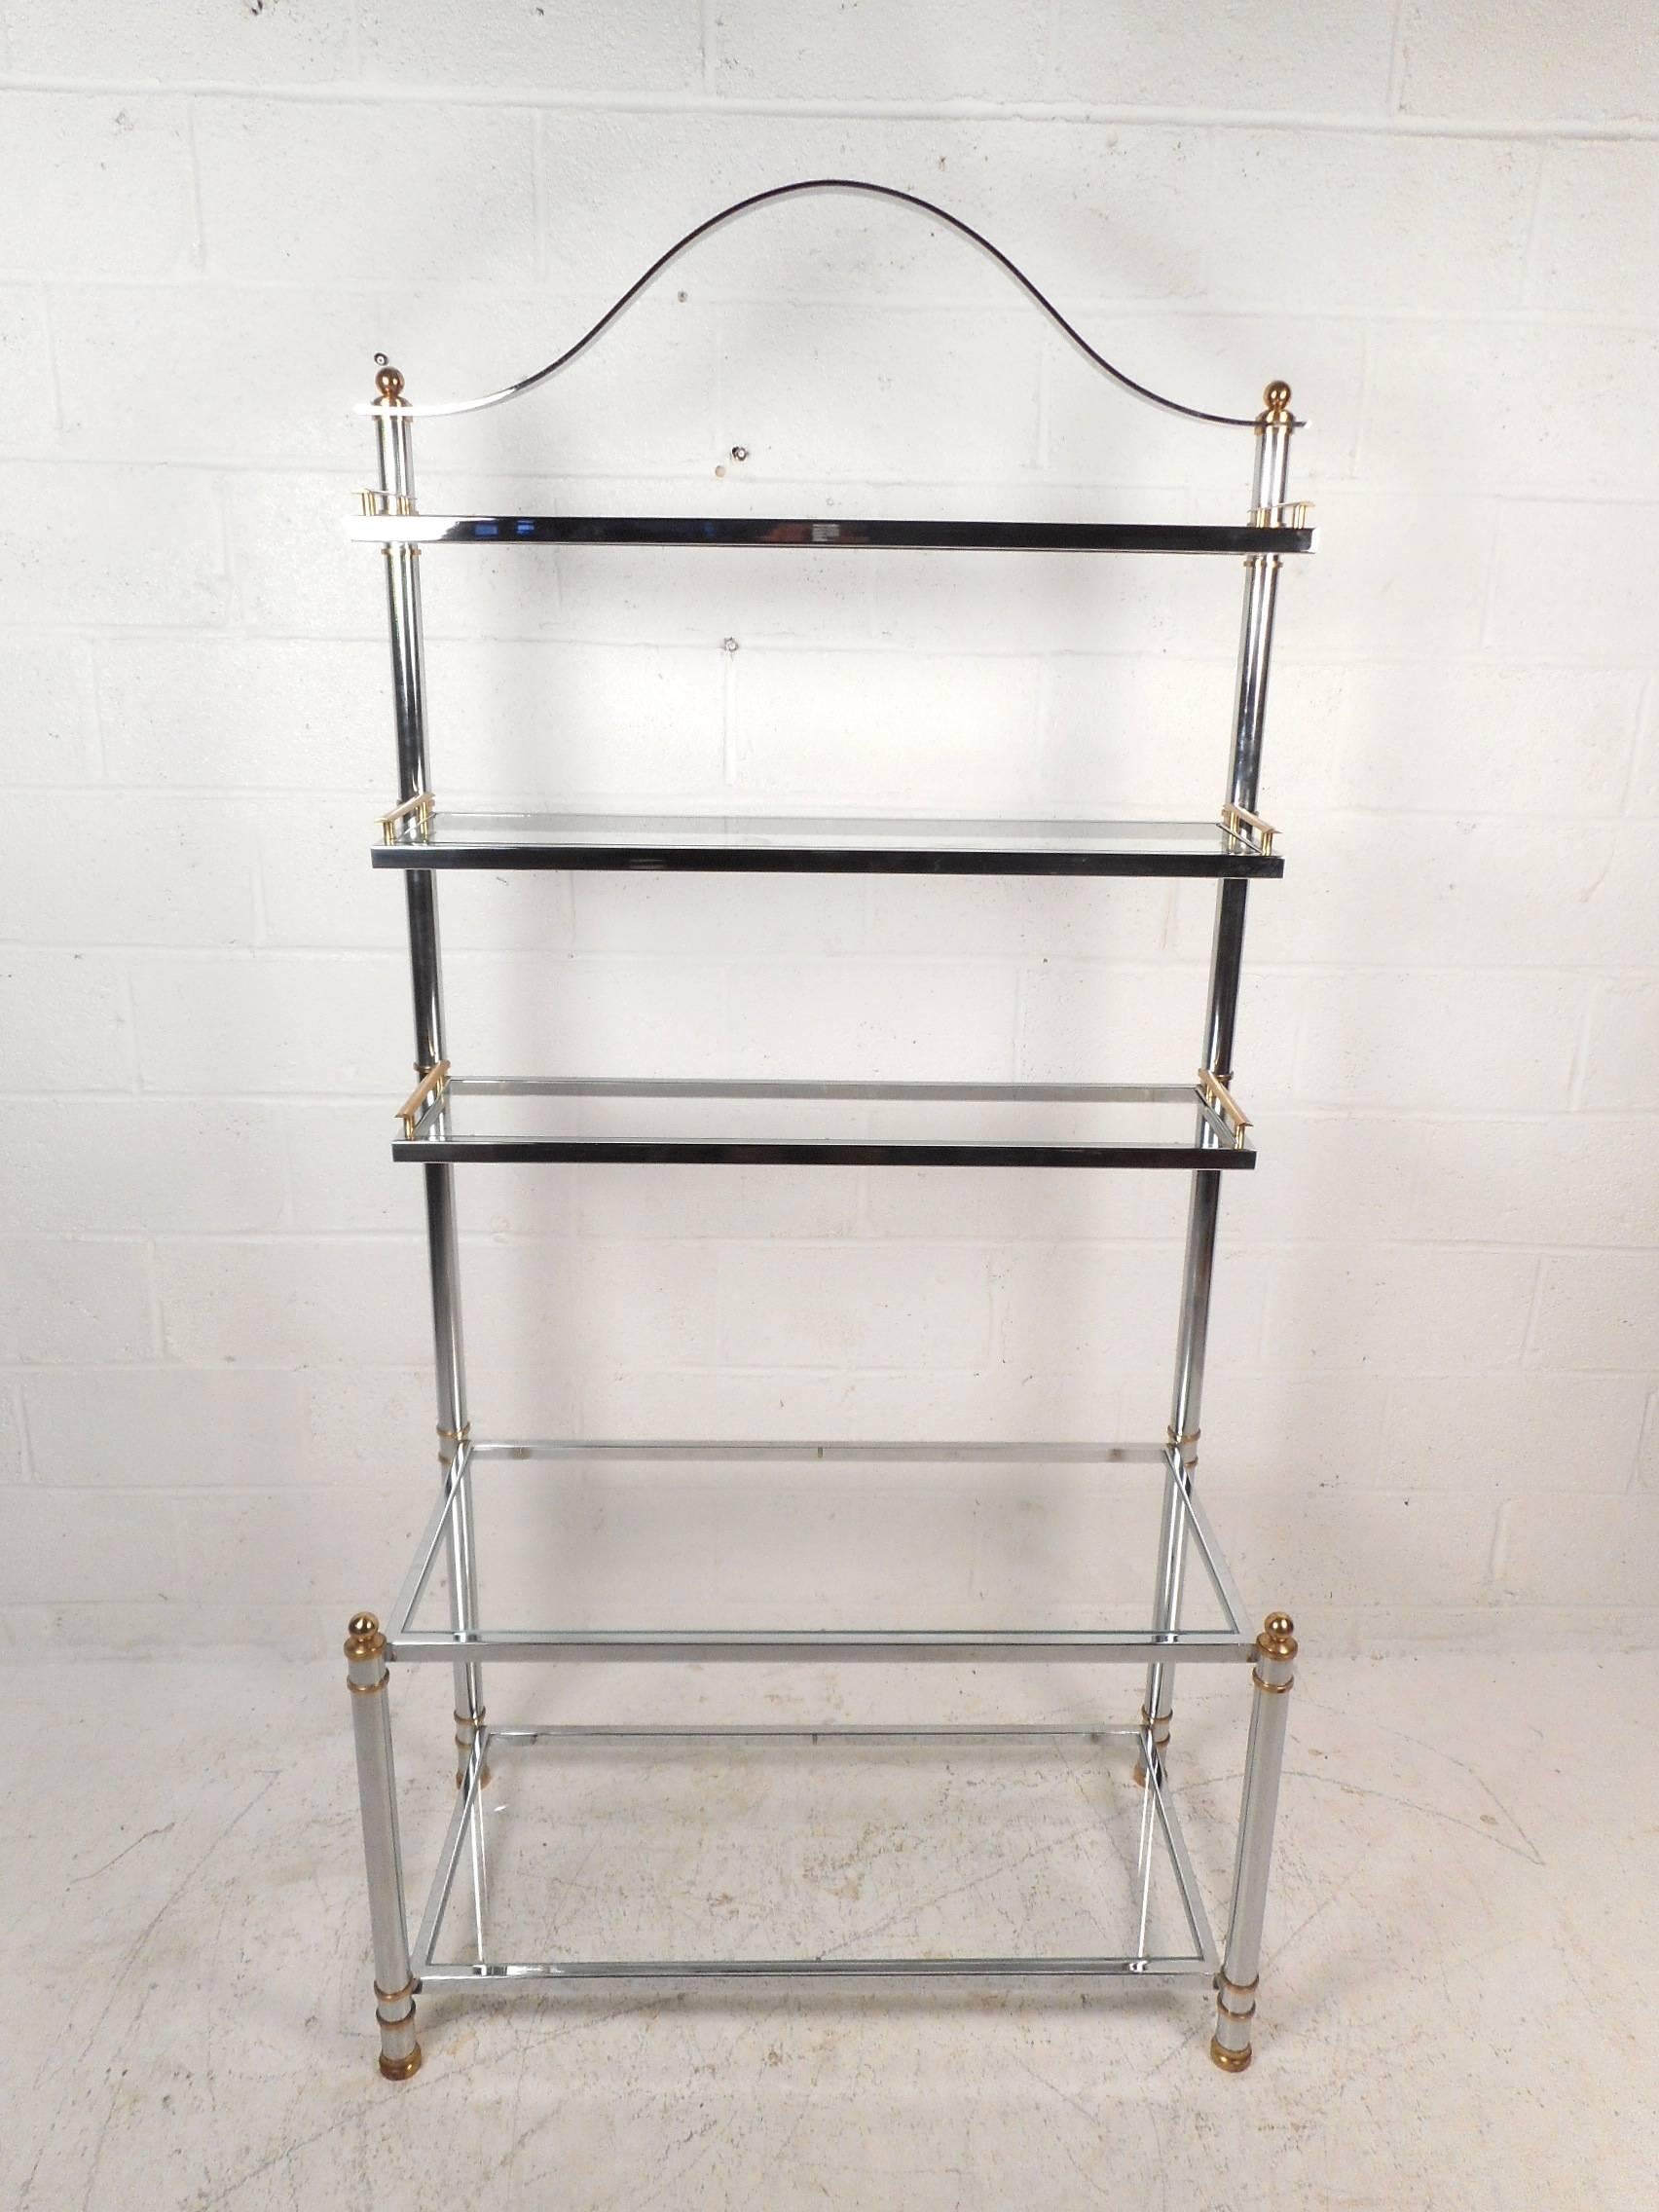 This beautiful vintage modern bakers rack features a chrome tubular frame with brass fixtures. Sleek design with five large glass shelves and a unique arch design on top adding to the allure. The top three shelves have sculpted brass fixtures on